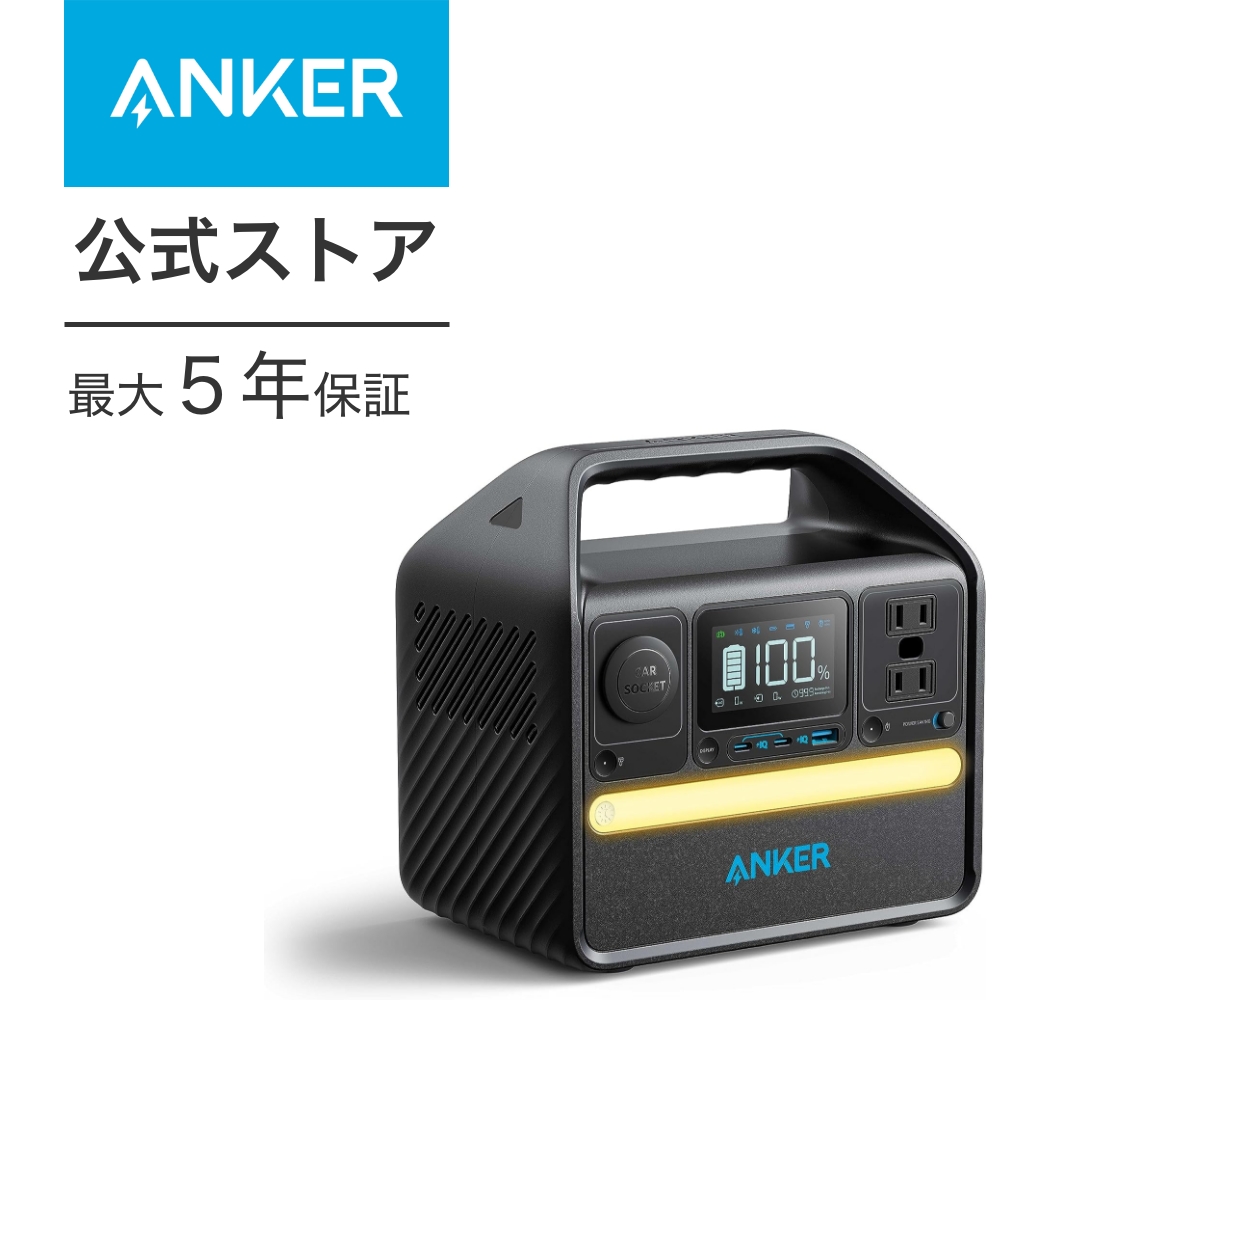 Anker A1721511 （522 Portable Power Station PowerHouse 320Wh ブラック） モバイルバッテリーの商品画像